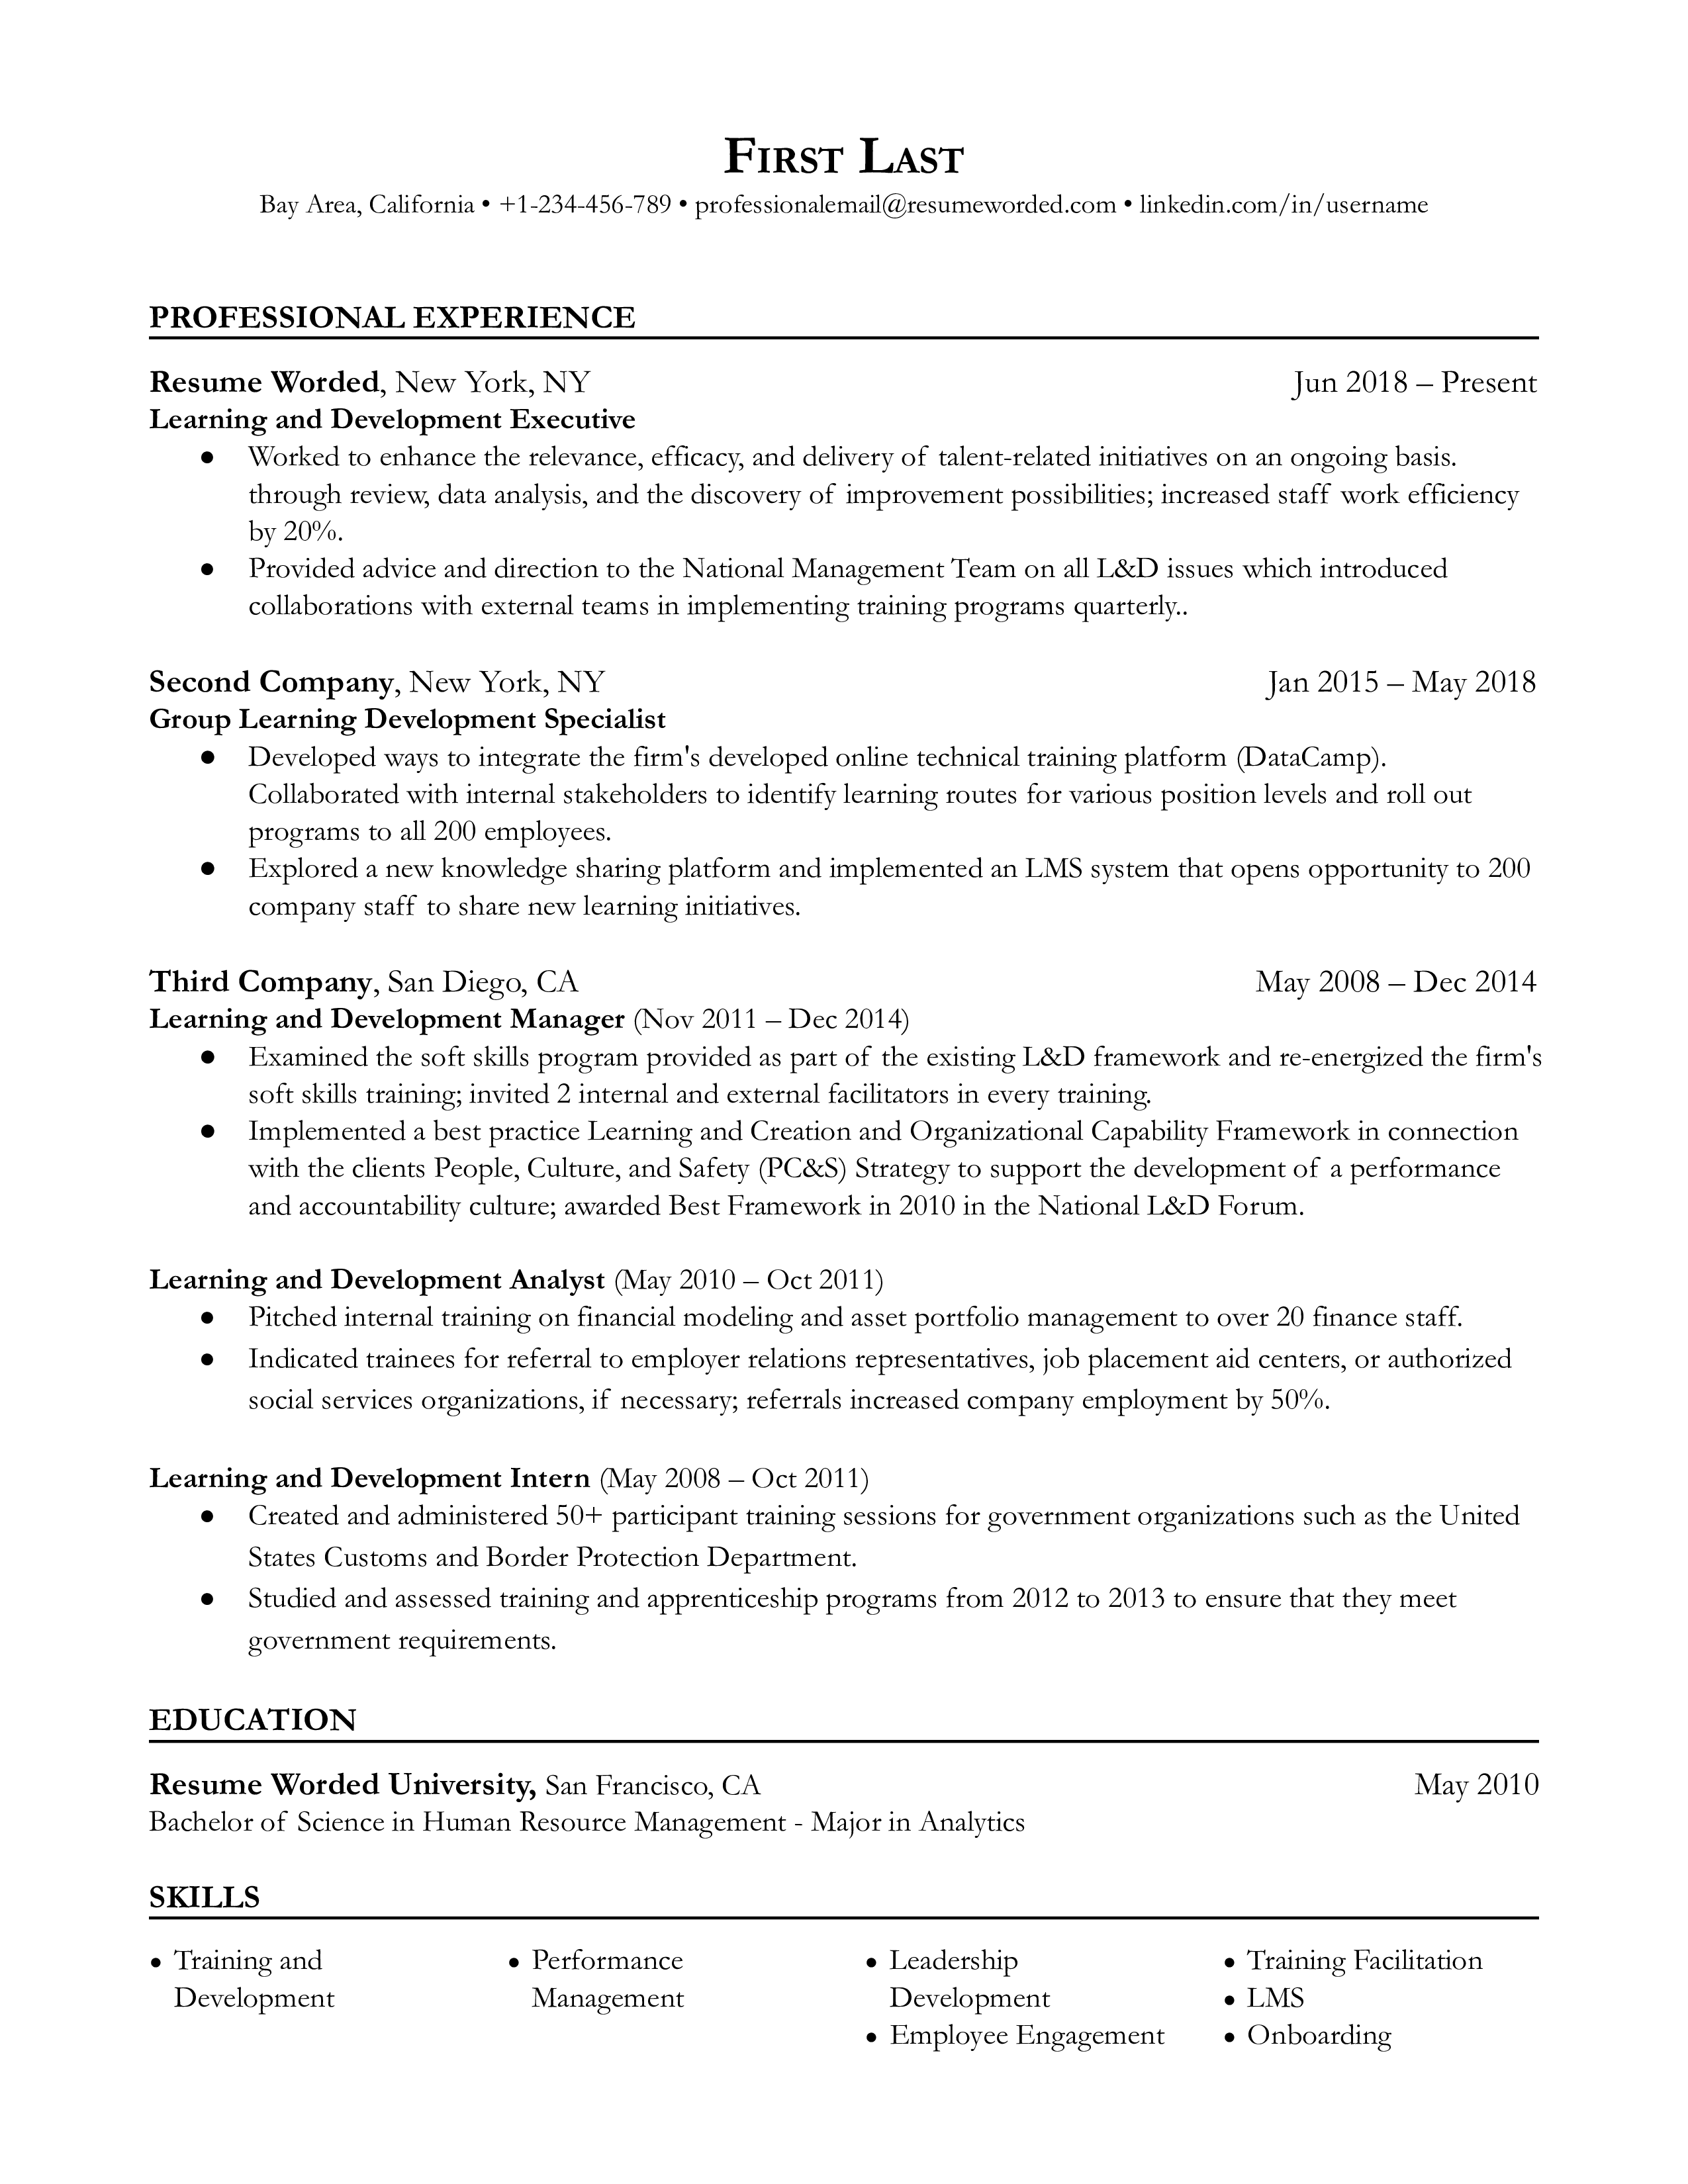 This is a template resume for a Learning and Development Executive with all necessary information that makes for a great resume